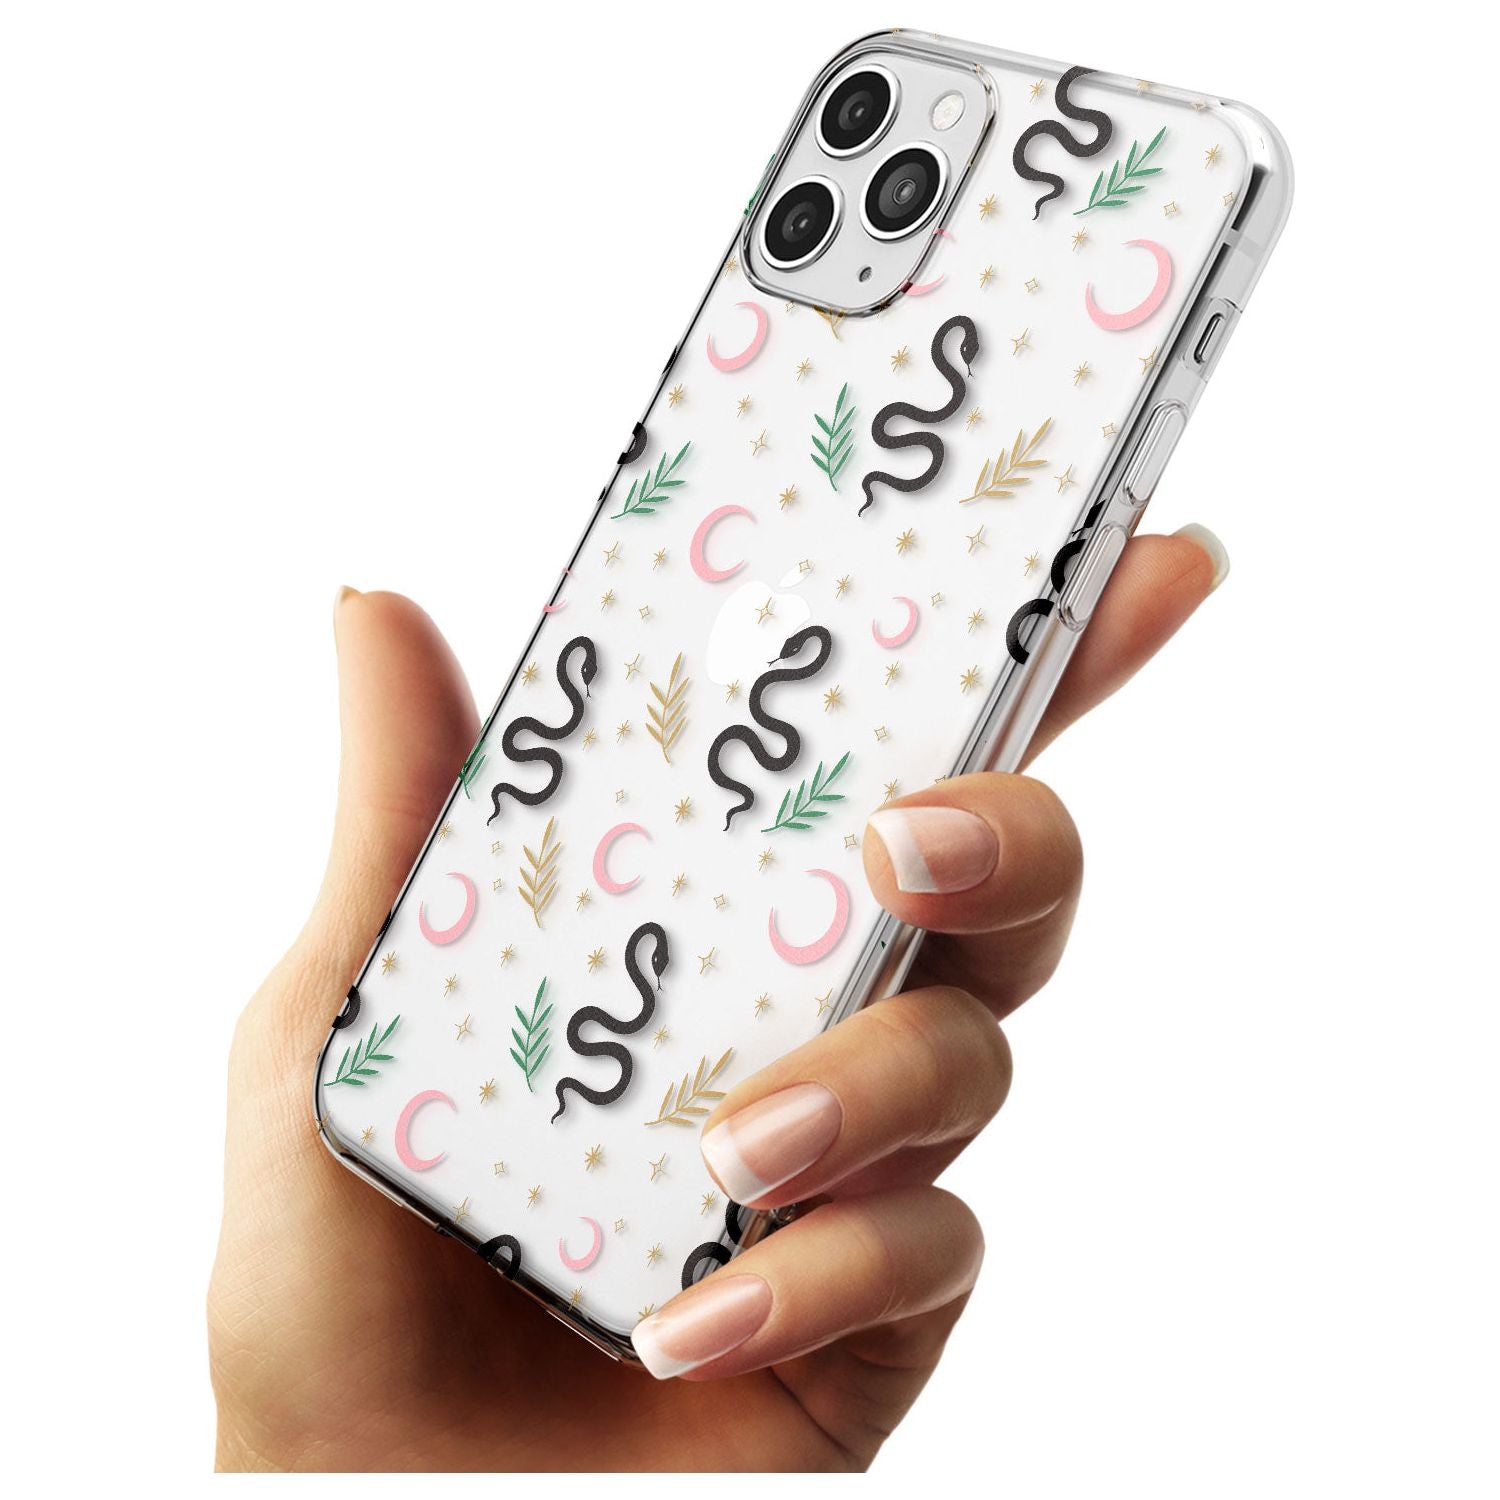 Snake & Moon Pattern (Clear) Black Impact Phone Case for iPhone 11 Pro Max